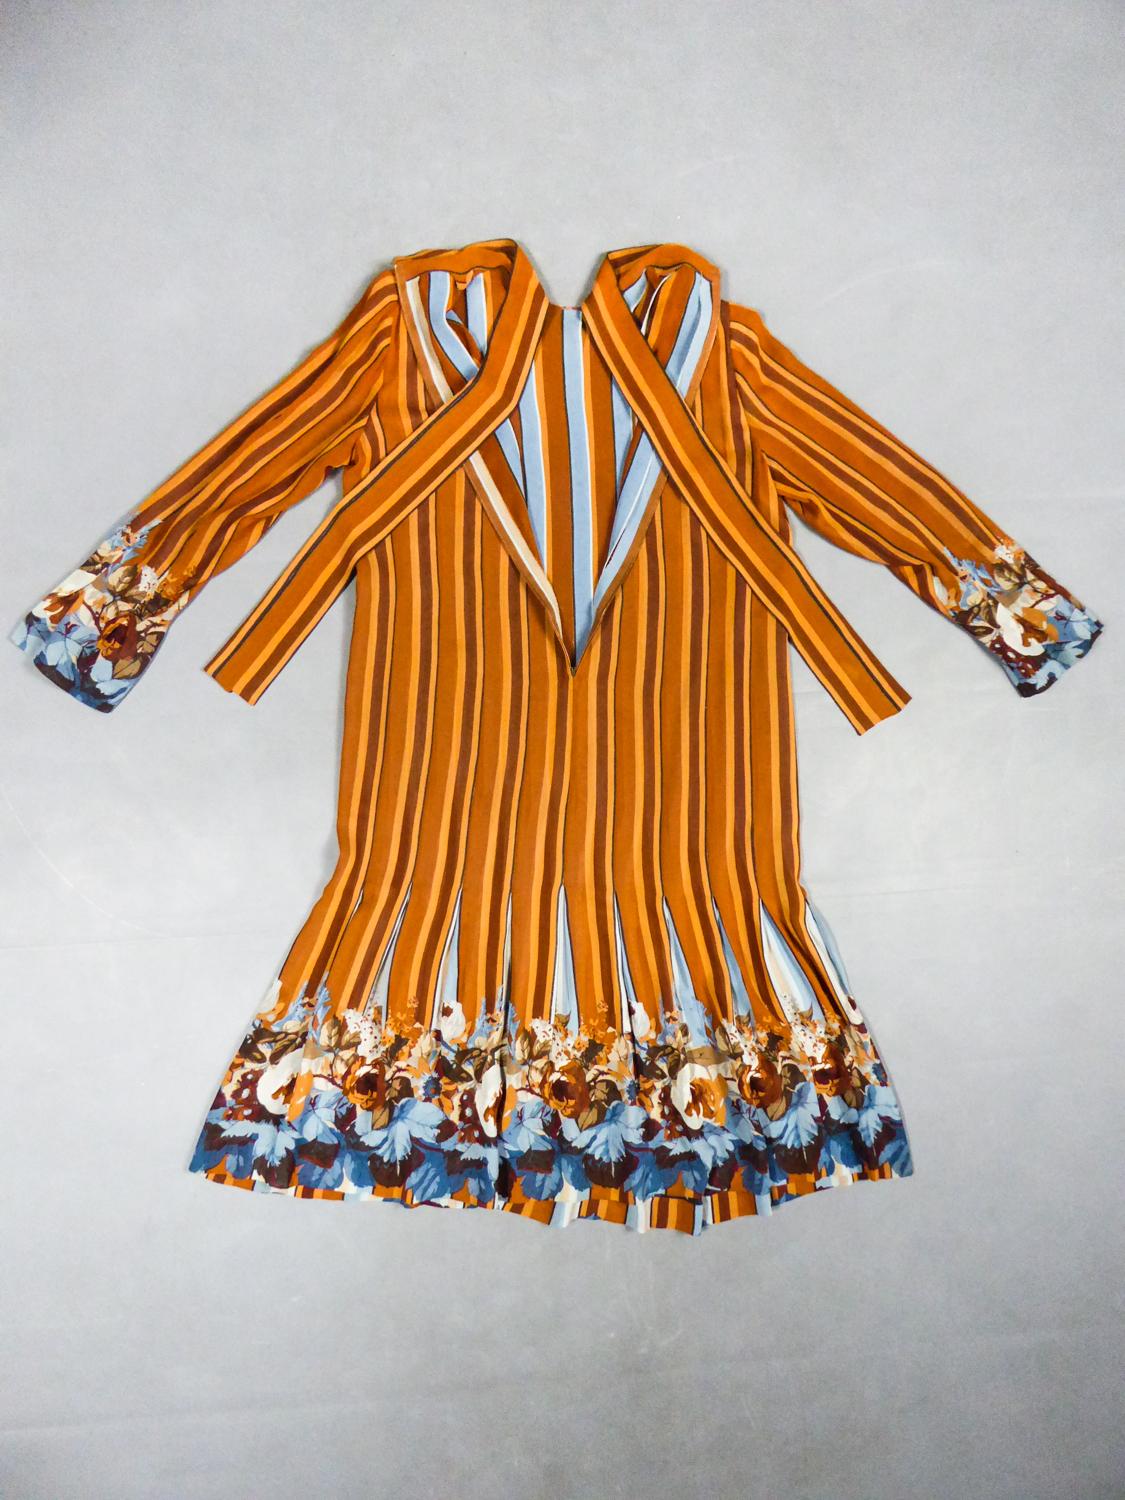 Circa 1970
France

Elegant timeless dress in printed silk crepe by an anonymous French designer dating from the 1970s. Straight dress with long sleeve and a crew-neck with long tabs to tie. Amazing work of seams folded into strips inside the dress